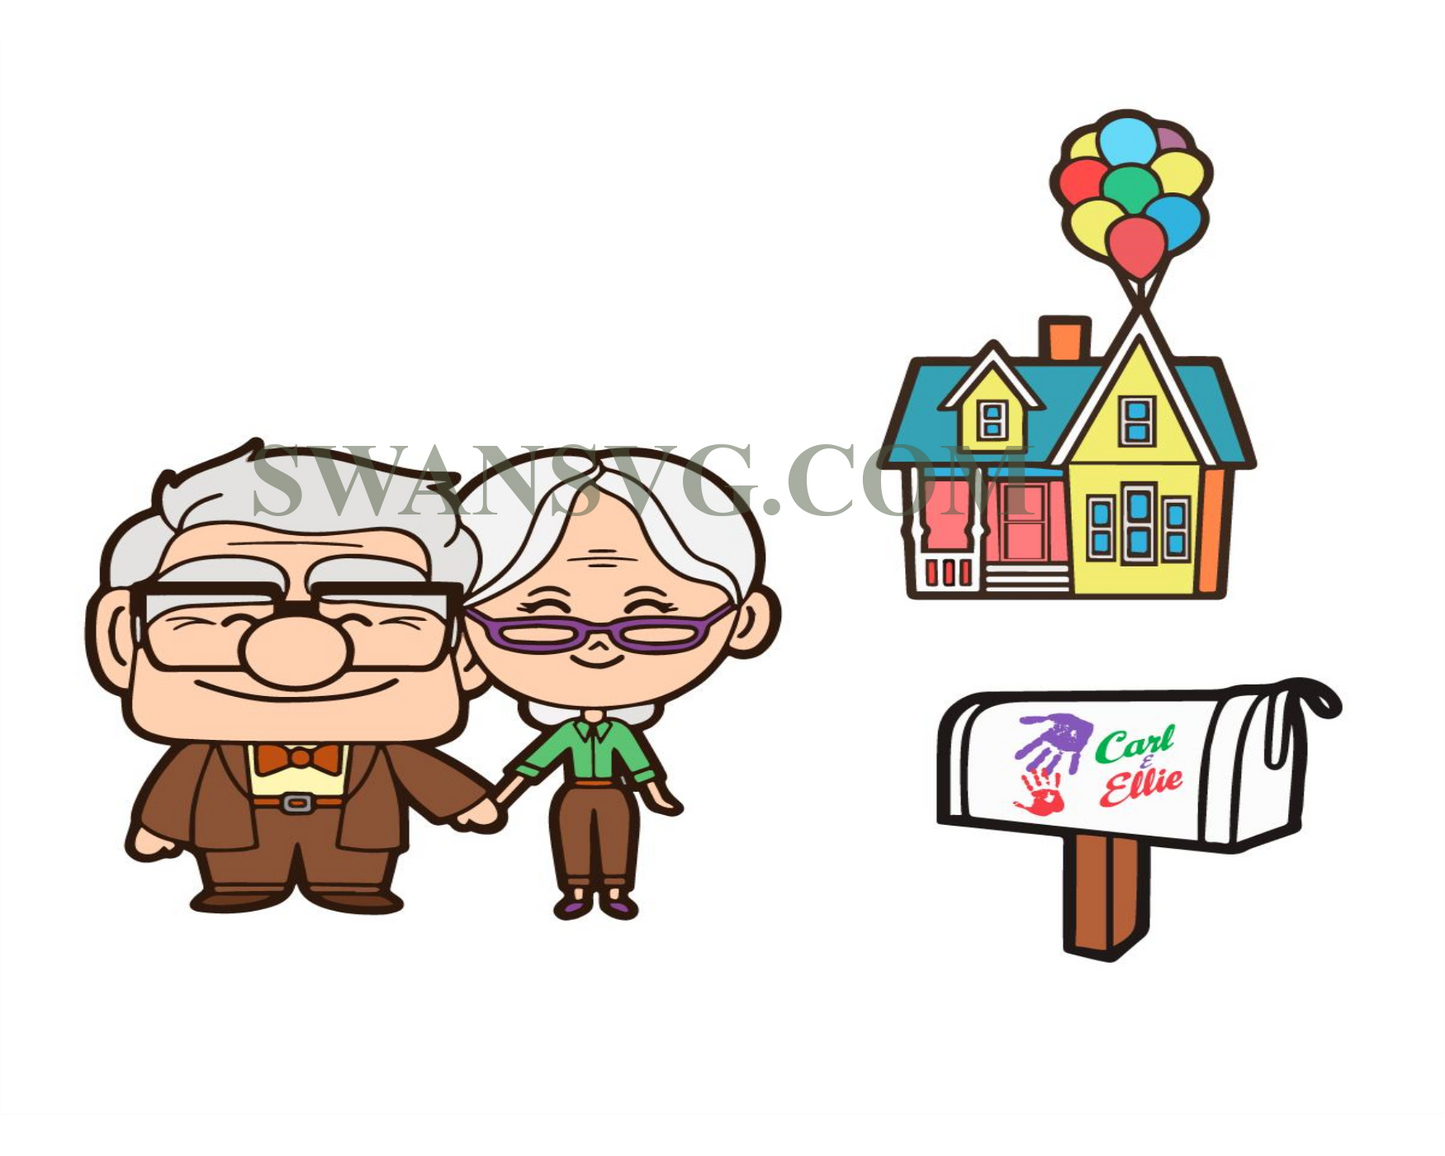 Up Svg Png, Layered Carl And Ellie Svg, Up Balloon Svg, Up House Svg